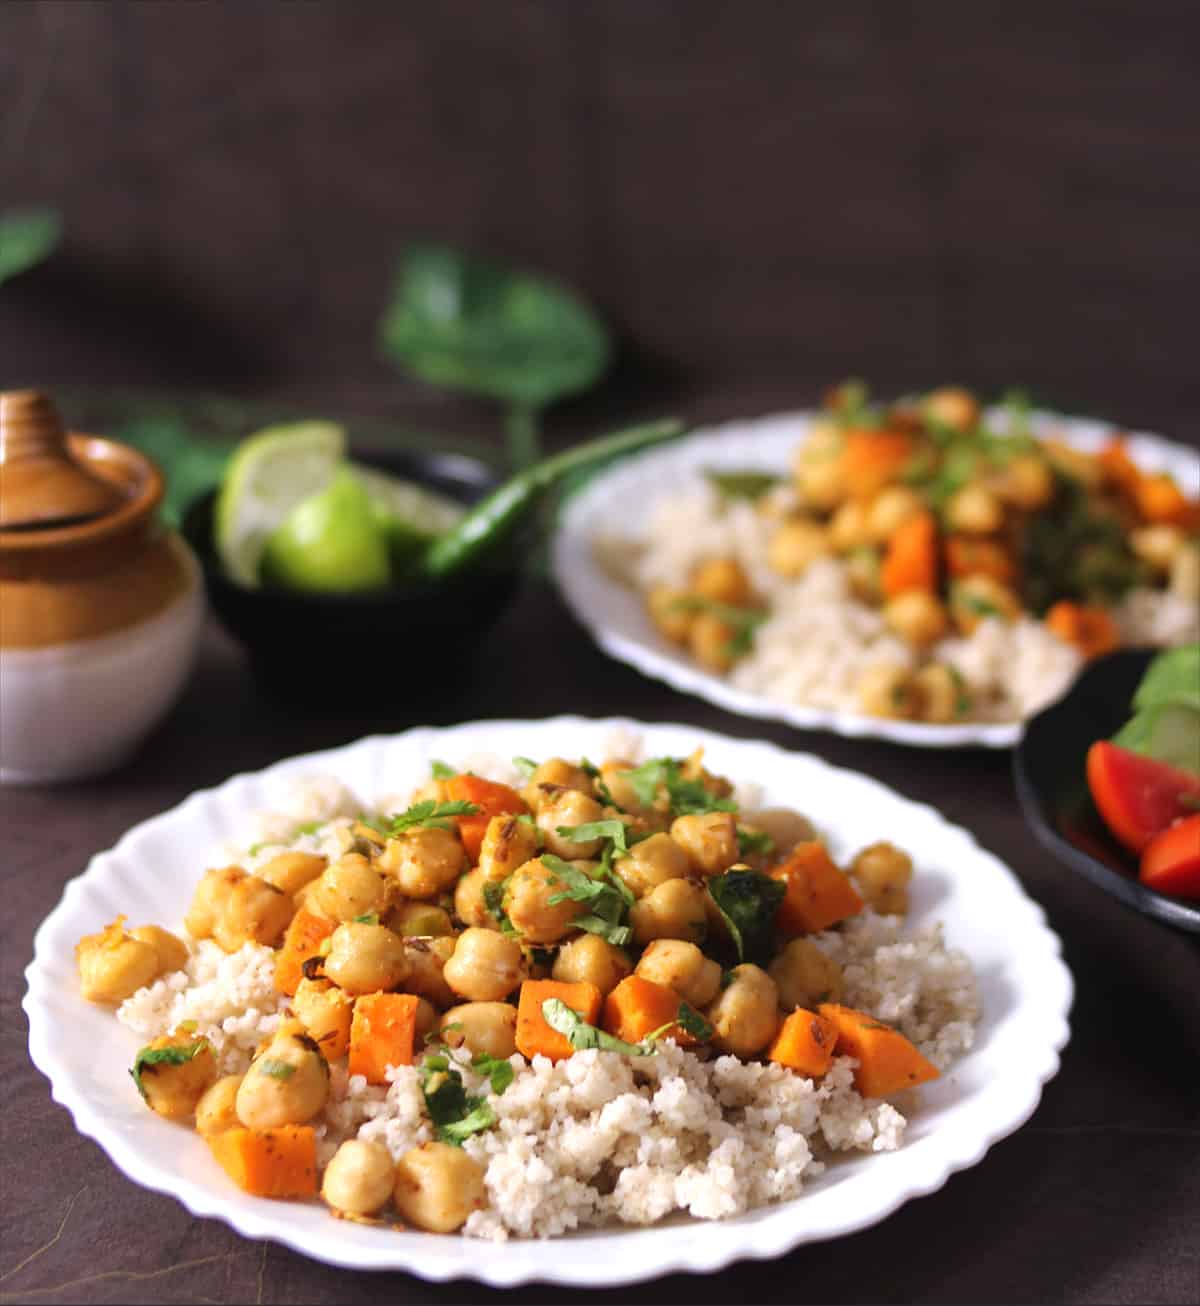 Perfectly cooked millet with chickpeas stir fry on top, complete vegetarian meal